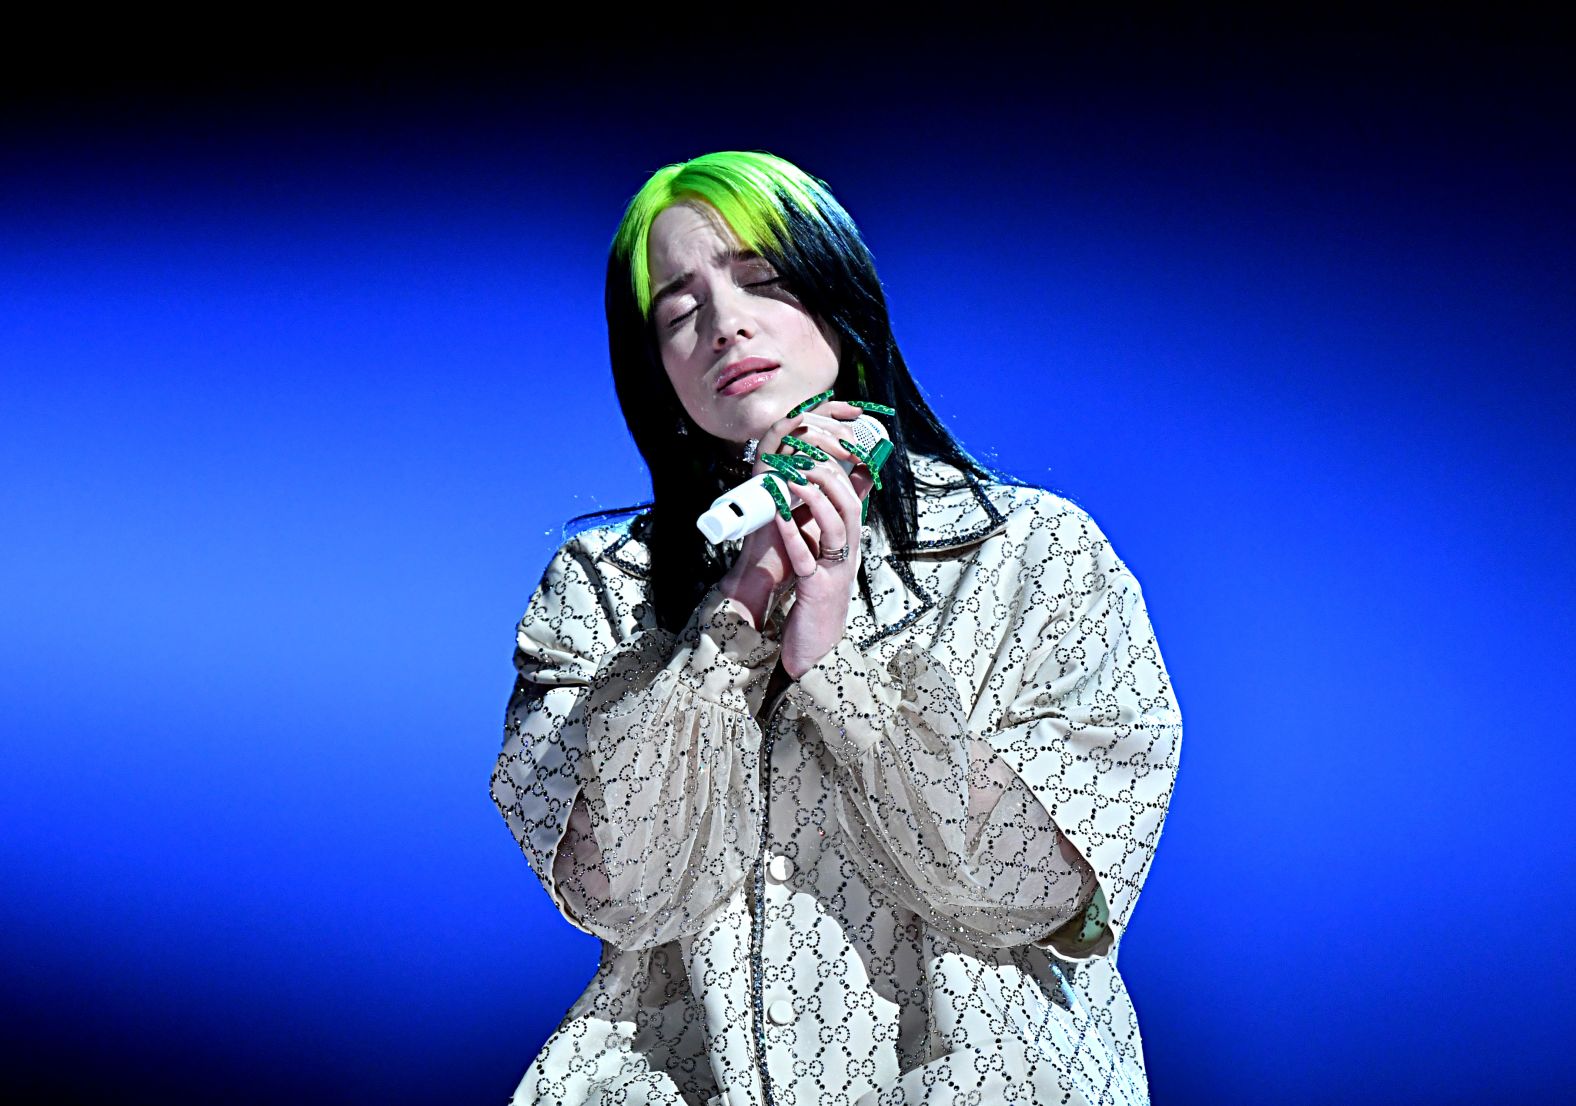 Billie Eilish performs "When the Party's Over."